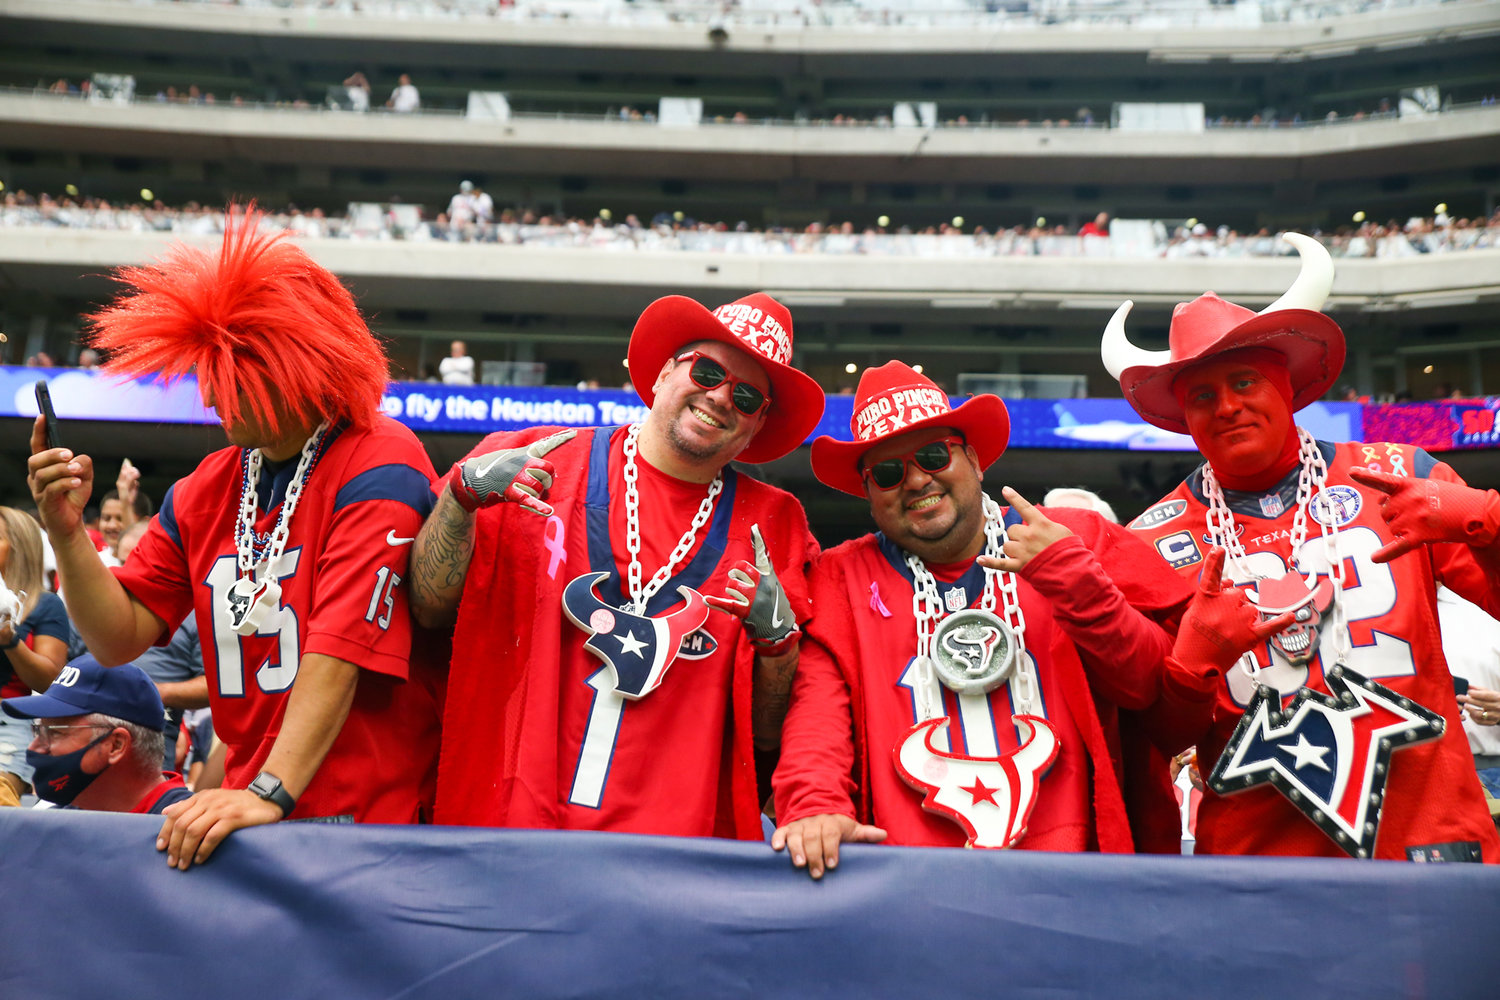 Houston Texans fans during the first half of an NFL game between the Houston Texans and the Jacksonville Jaguars on September 12, 2021 in Houston, Texas.